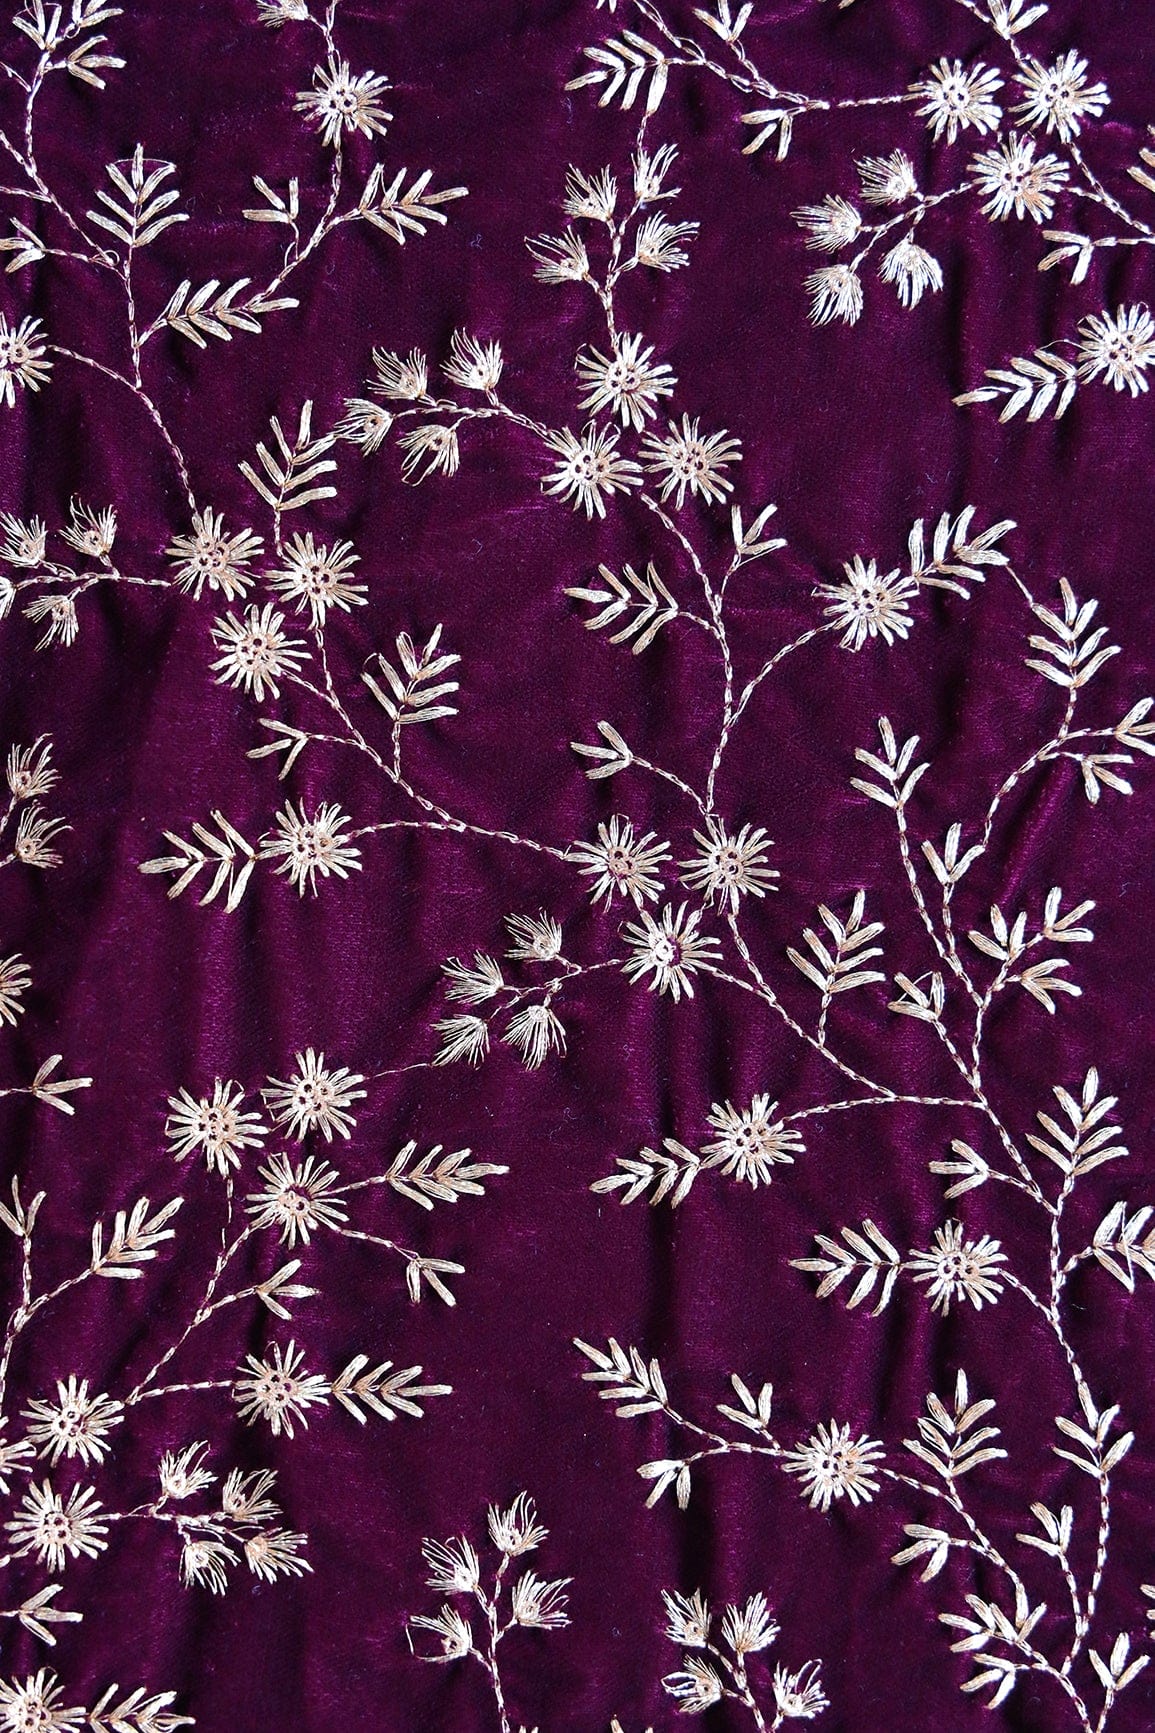 doeraa Embroidery Fabrics Gold Zari With Gold Sequins Floral Embroidery Work On Purple Velvet Fabric